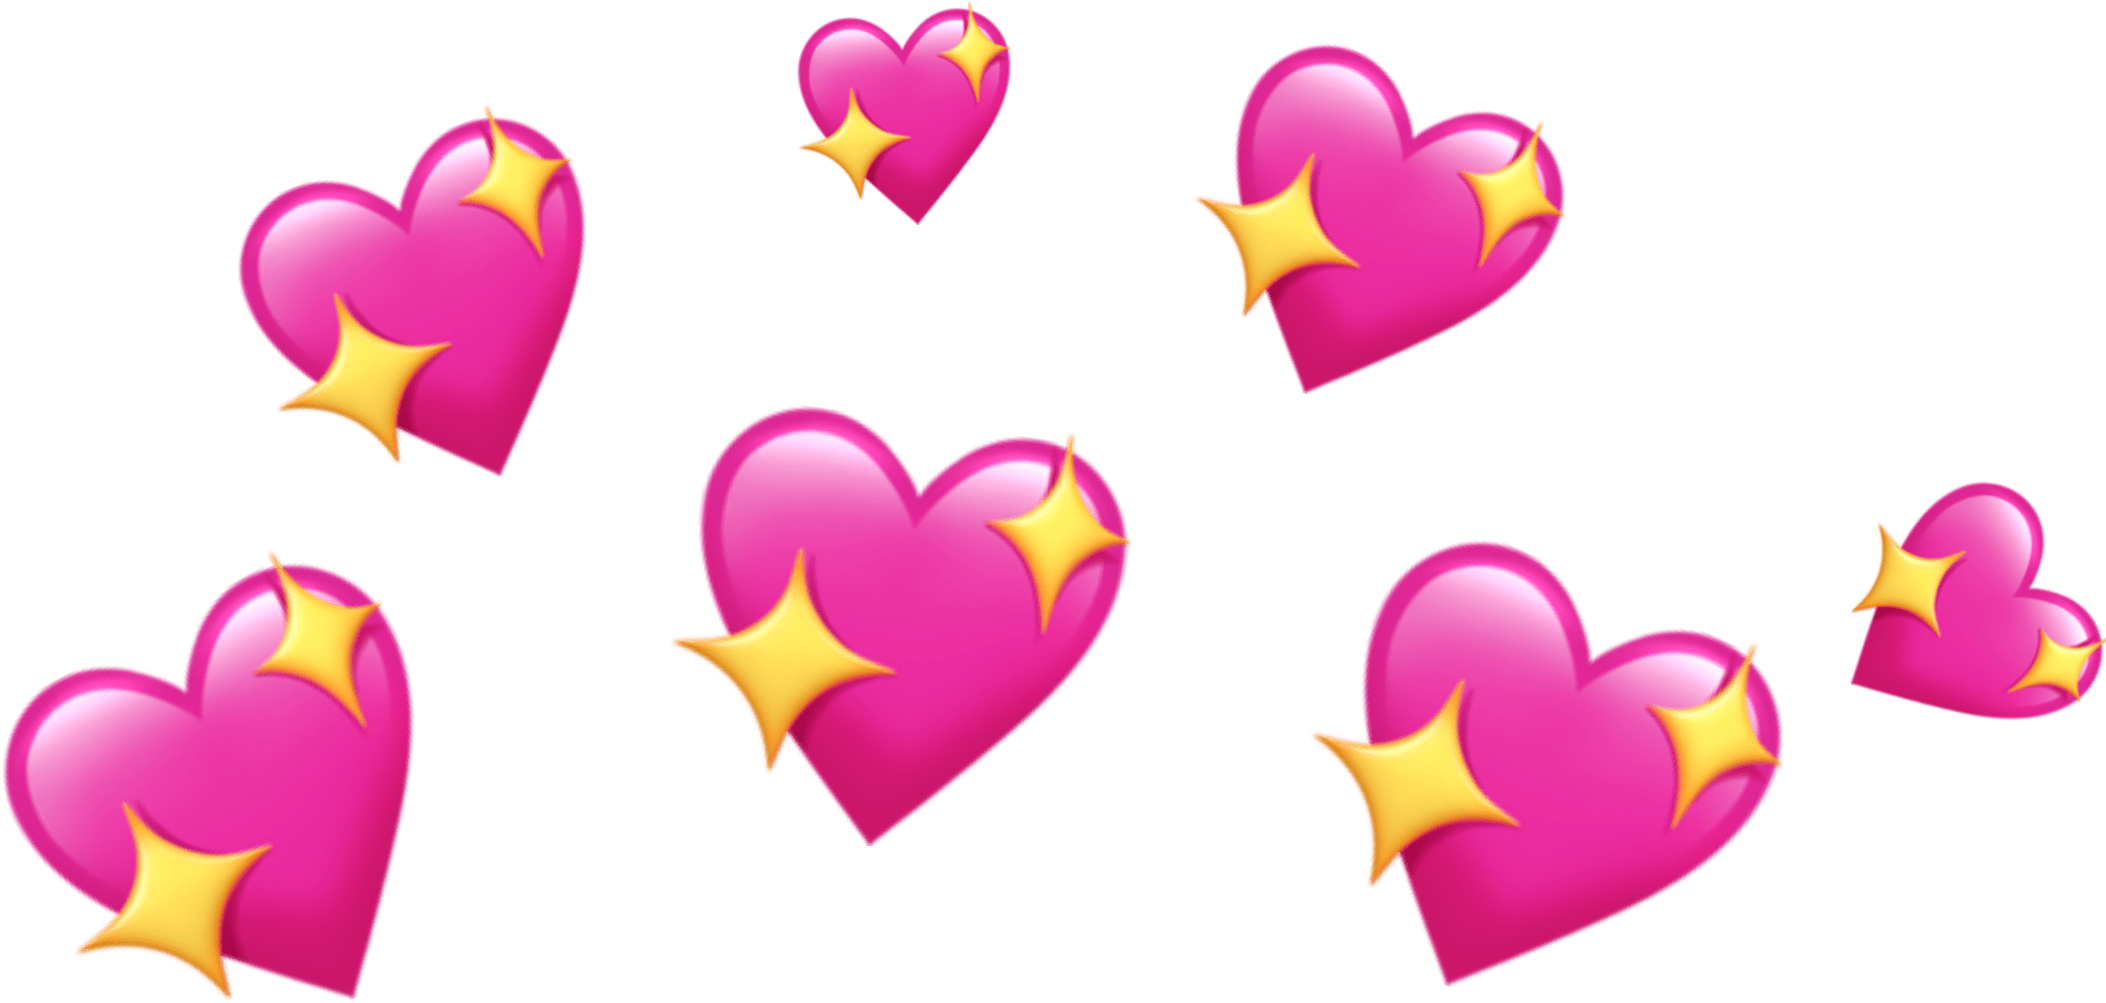 love, emoticon, princess crown png background full hd 1080p